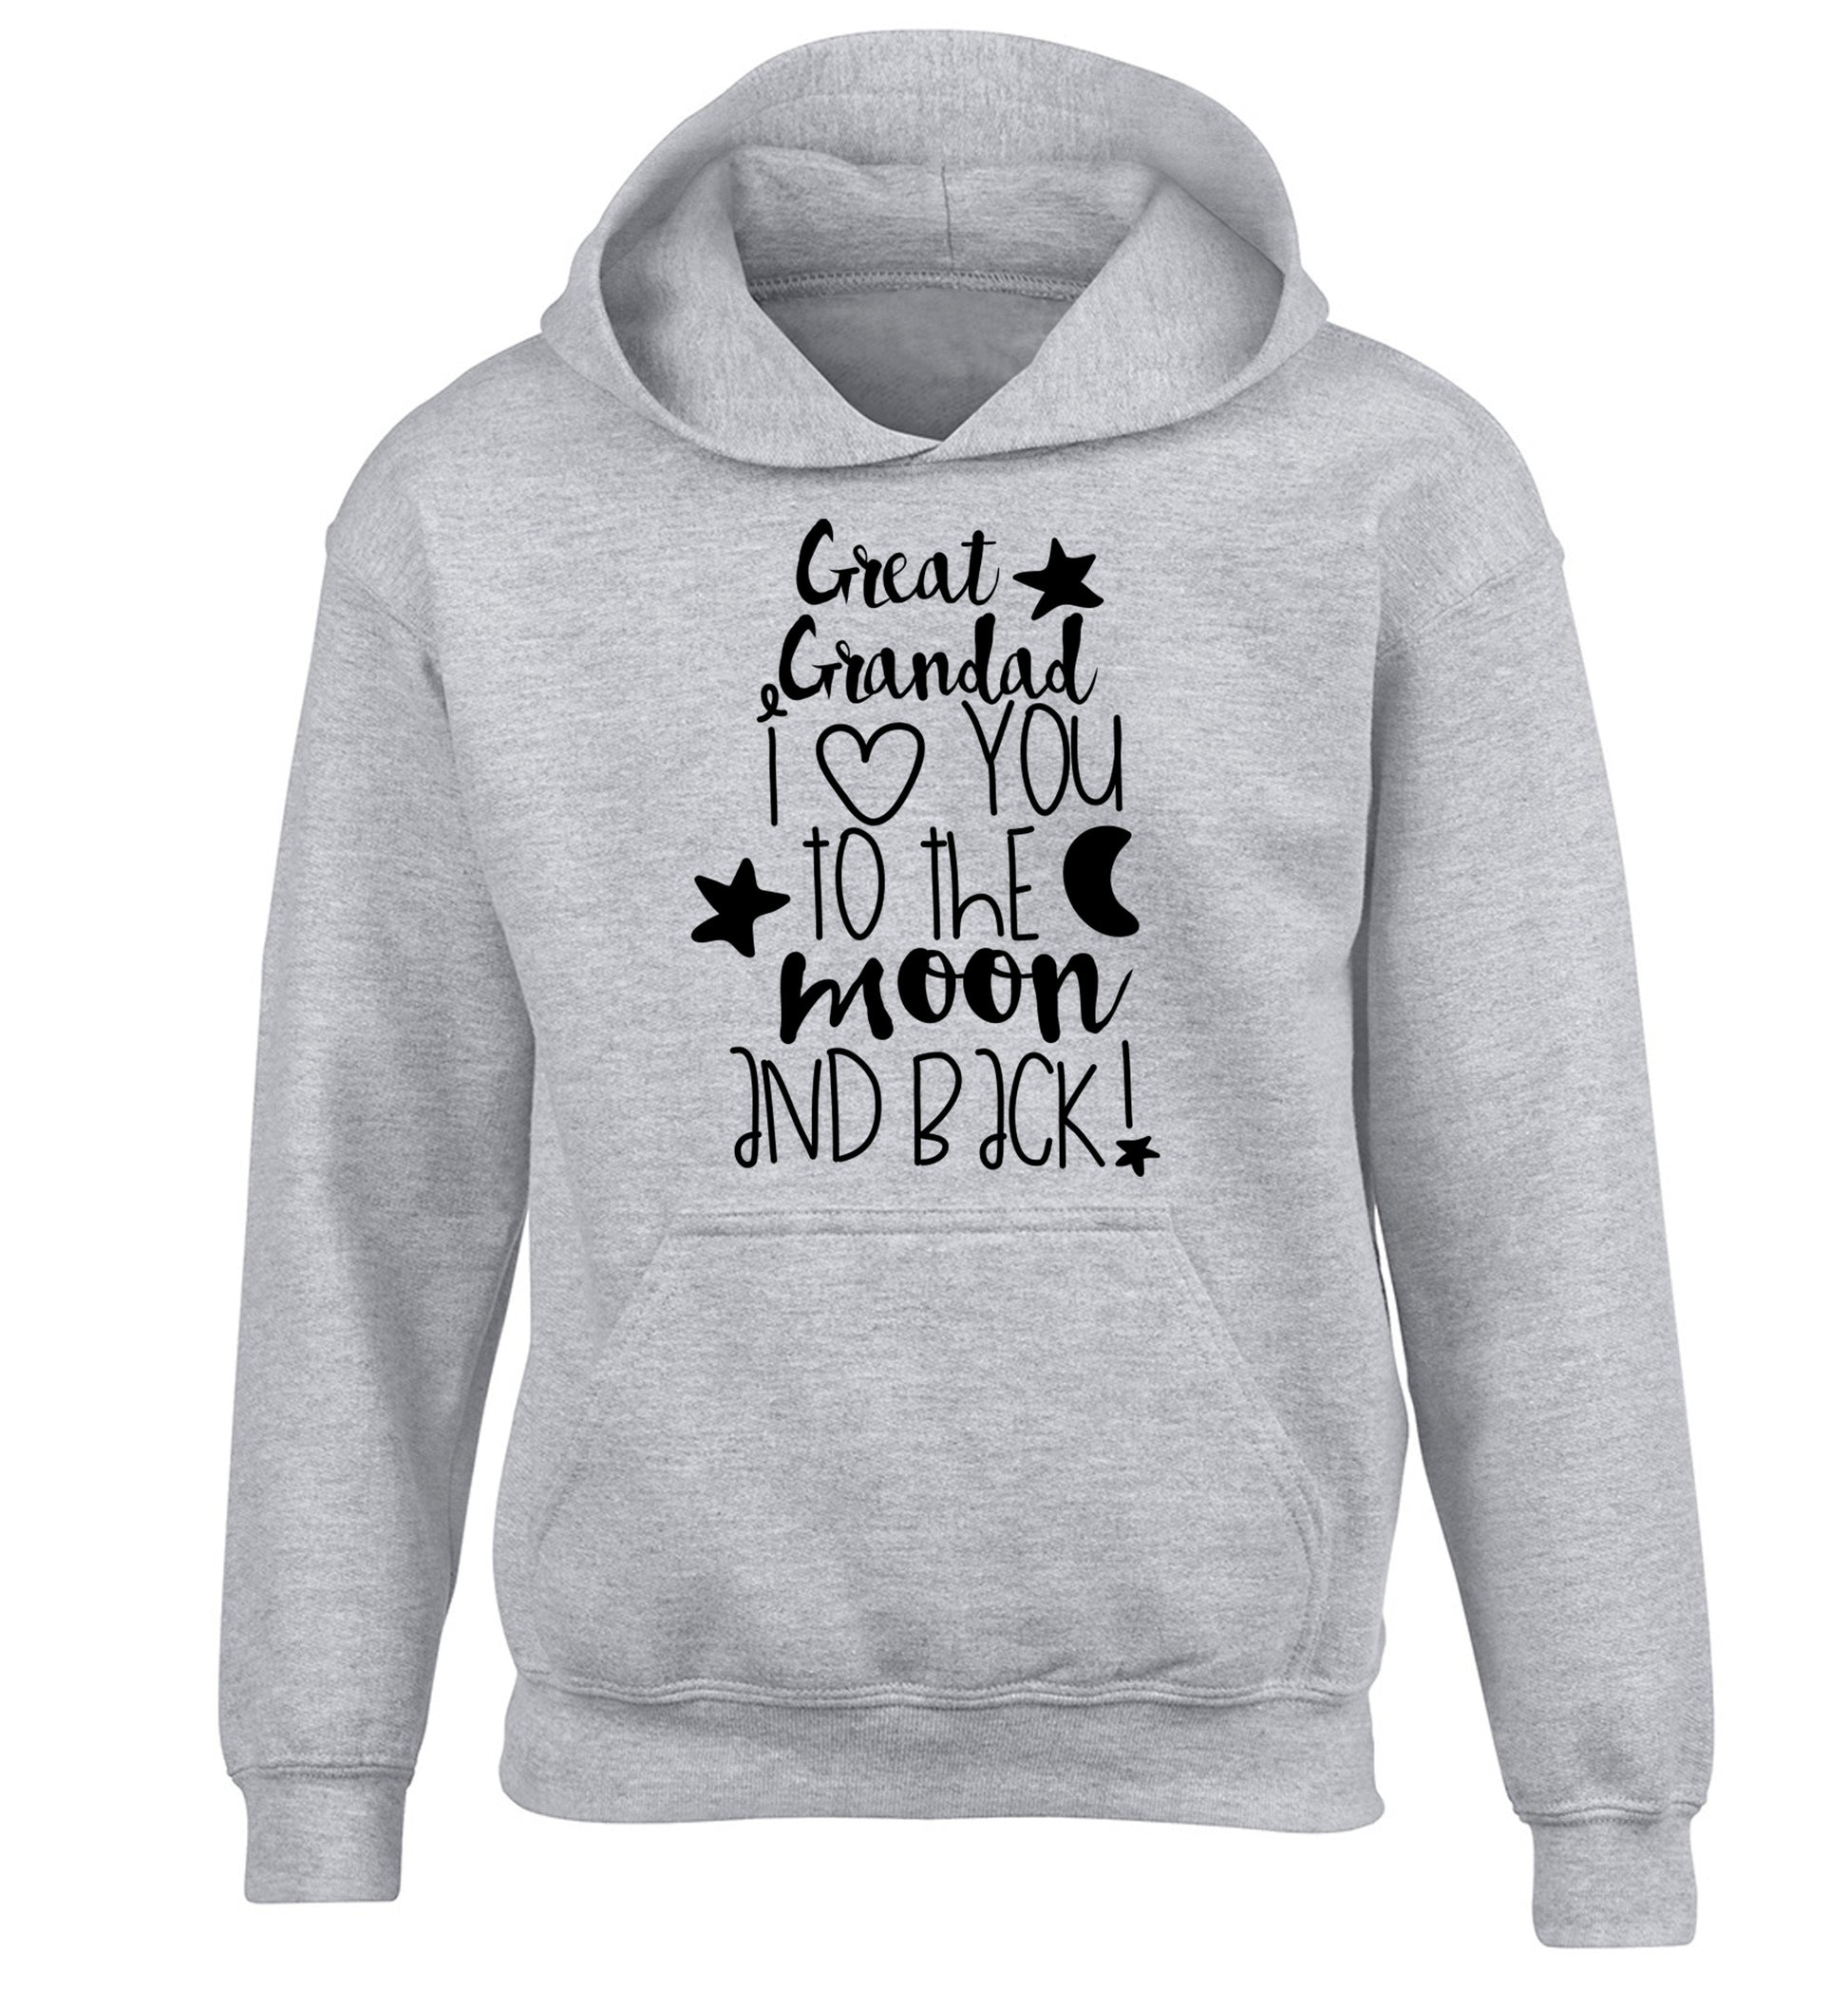 Great Grandad I love you to the moon and back children's grey hoodie 12-14 Years